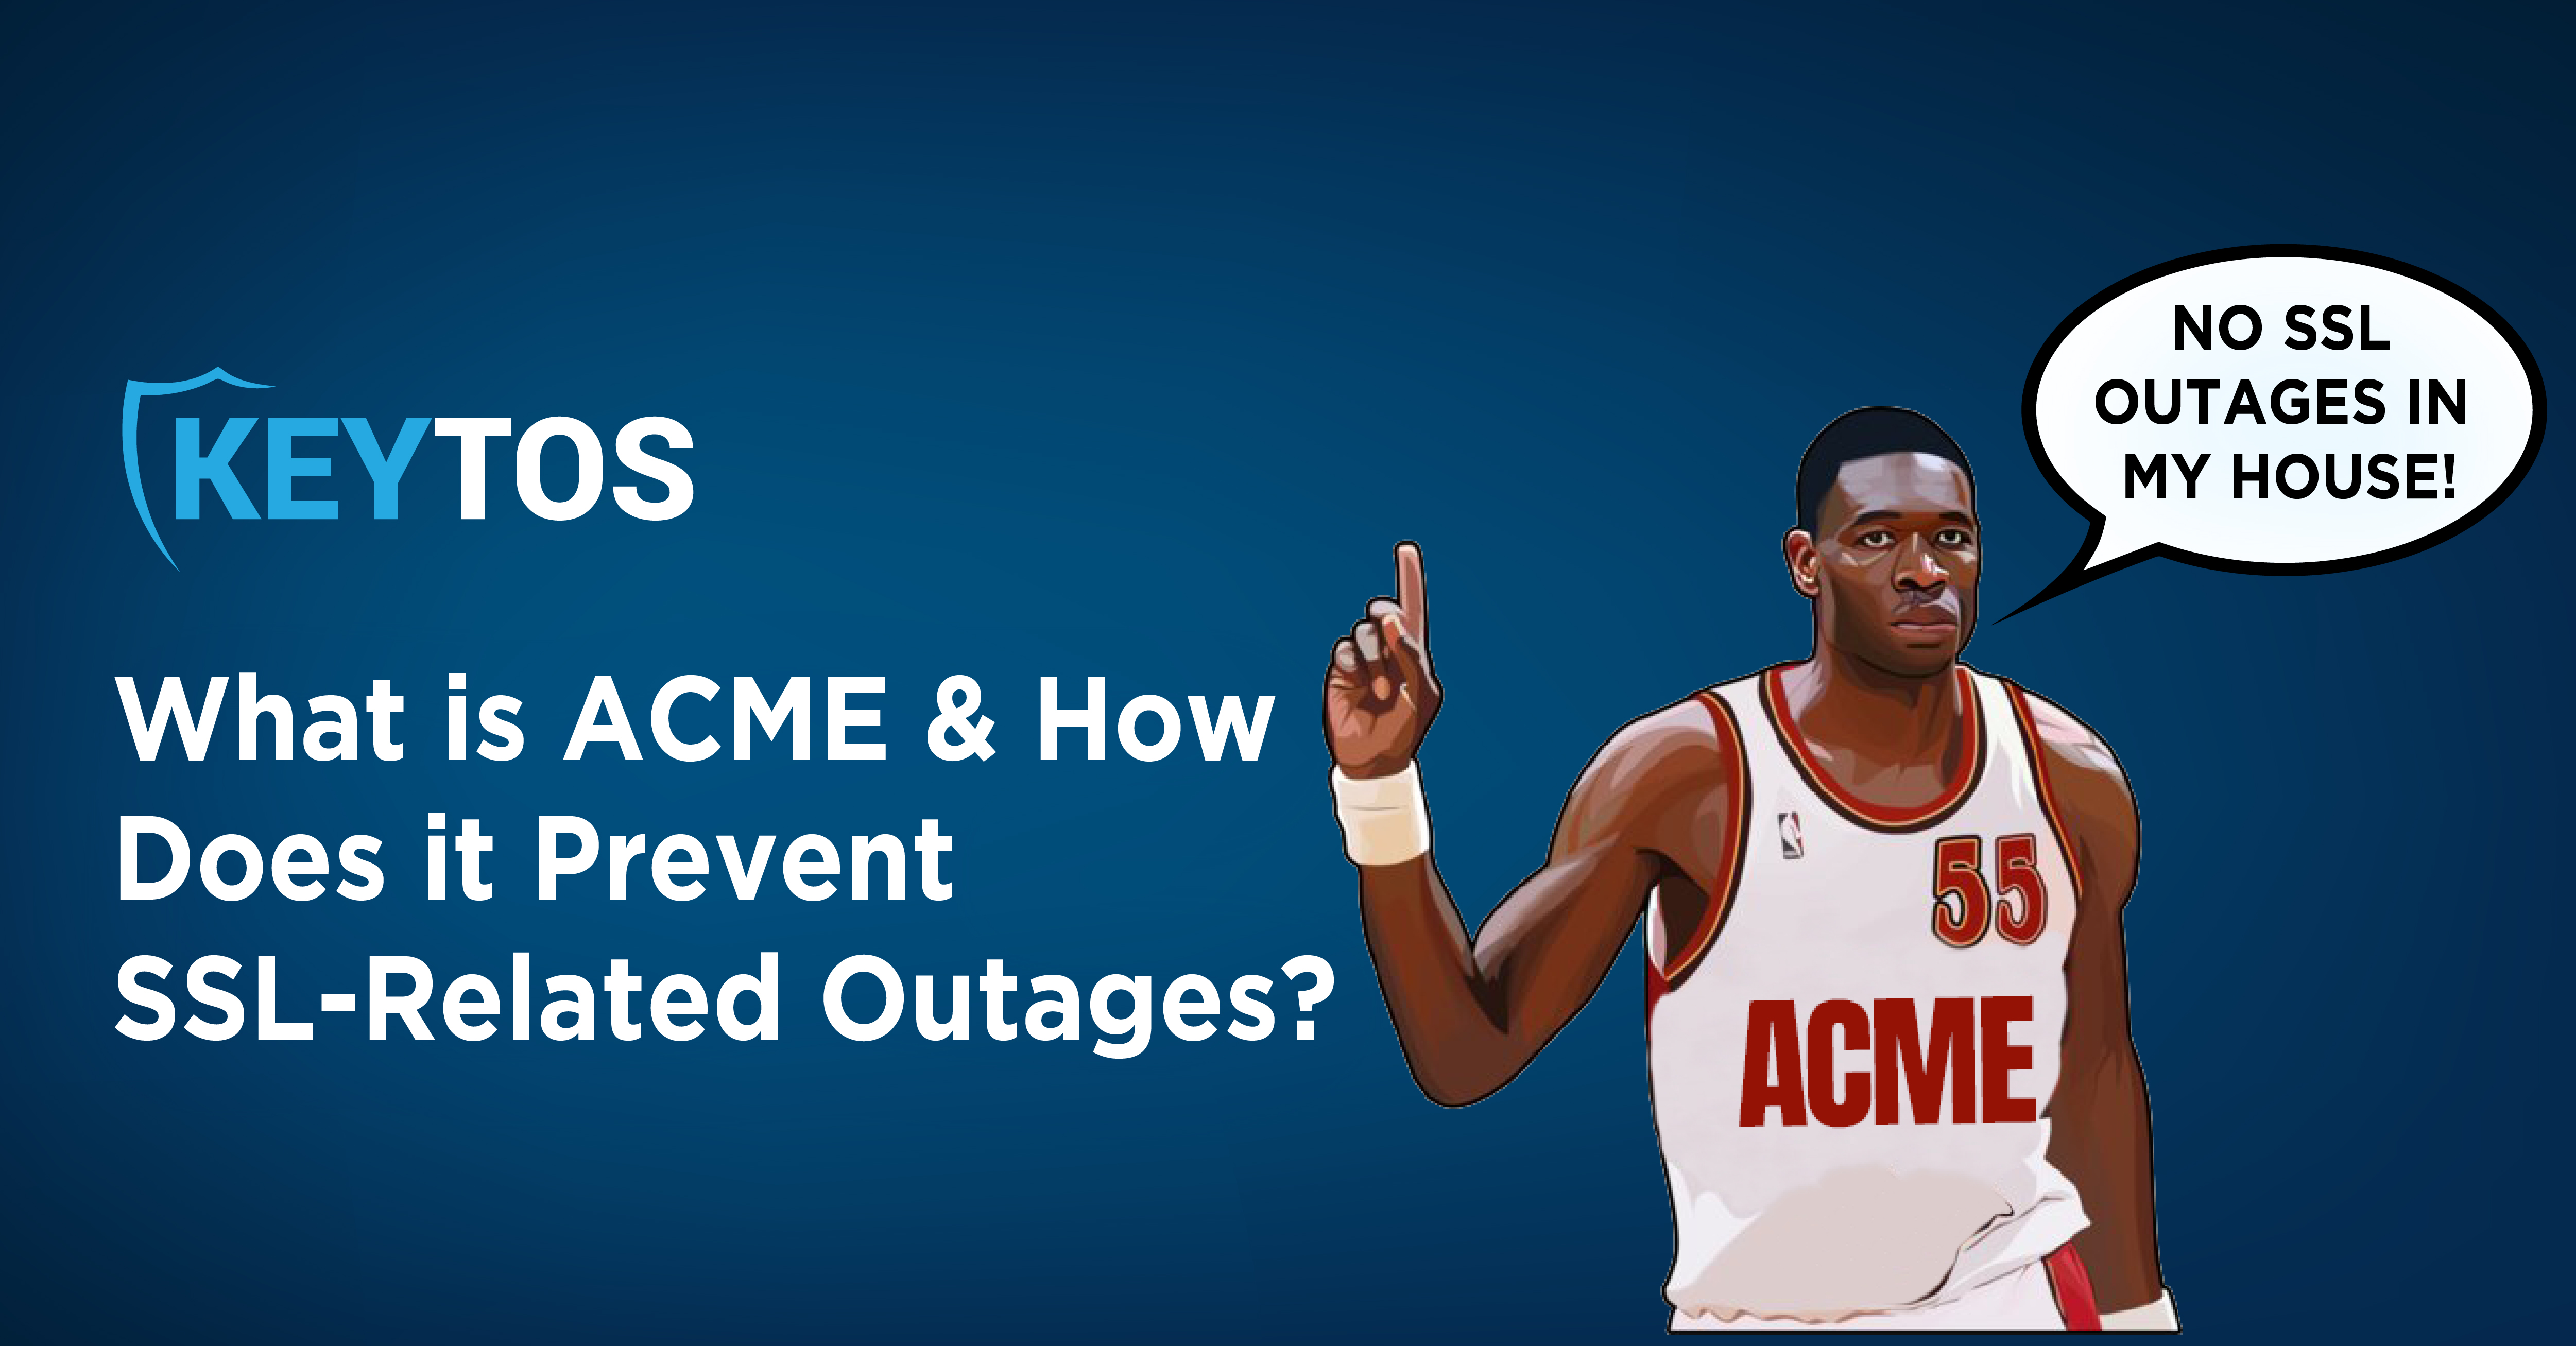 What is ACME & How Does It Prevent SSL Related Outages?